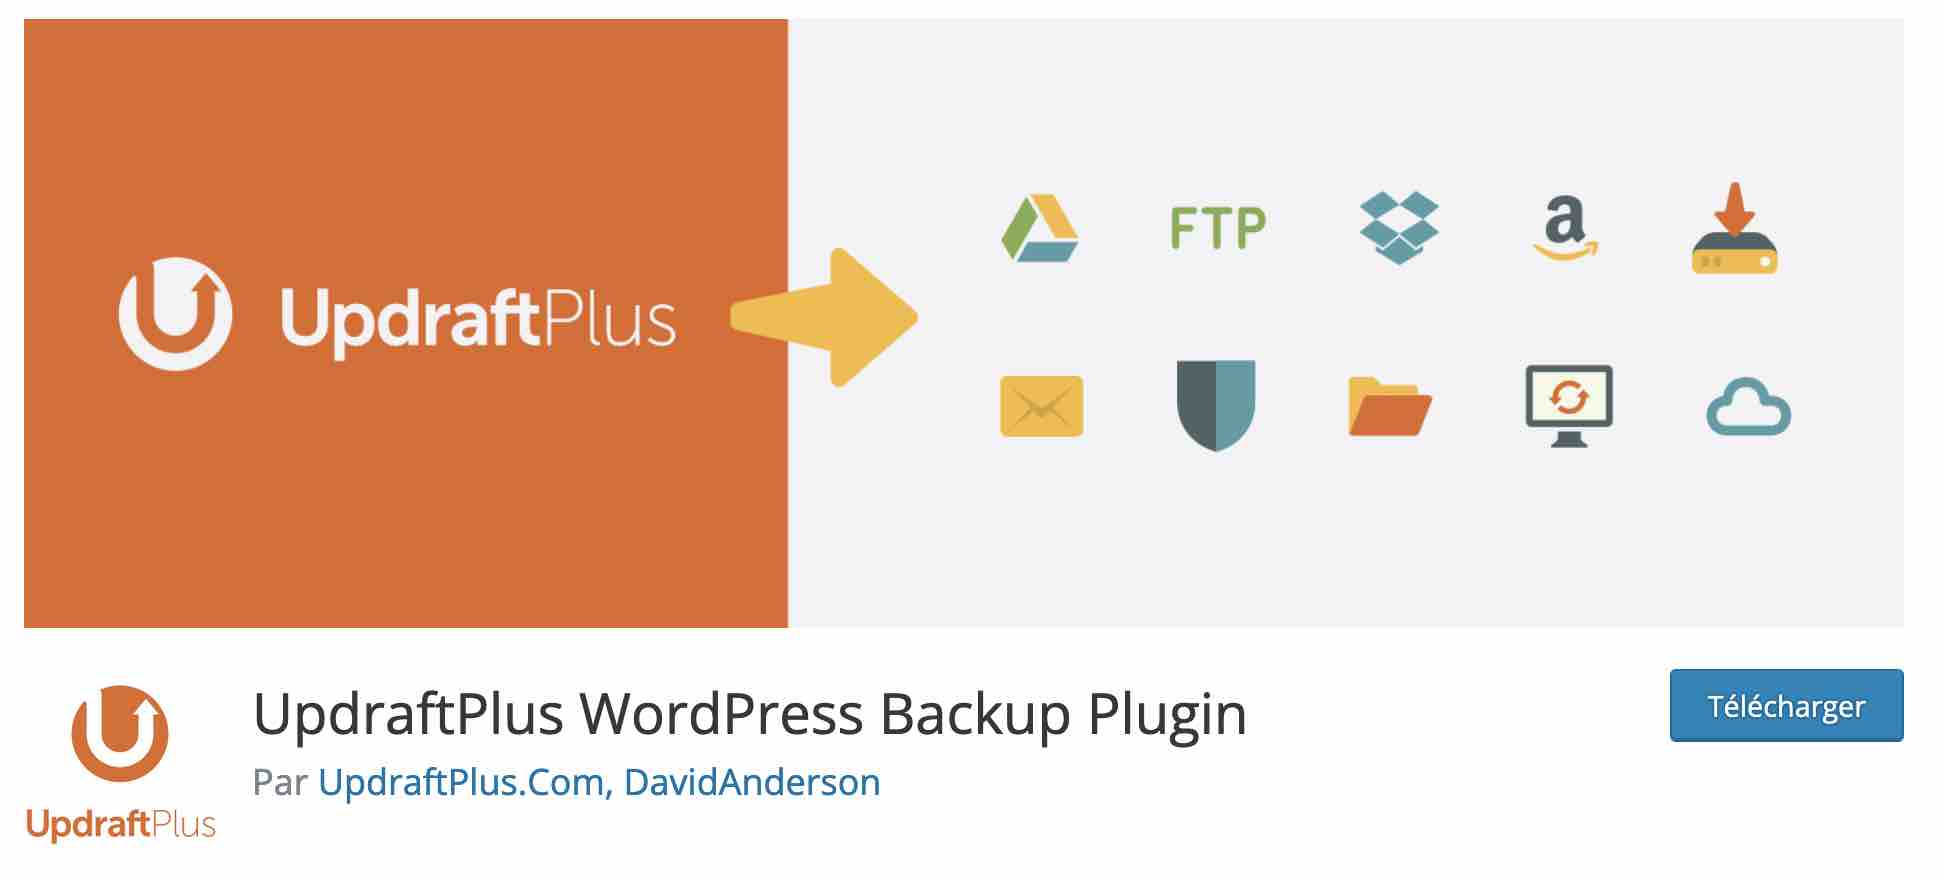 The UpdraftPlus extension allows backing up WordPress.